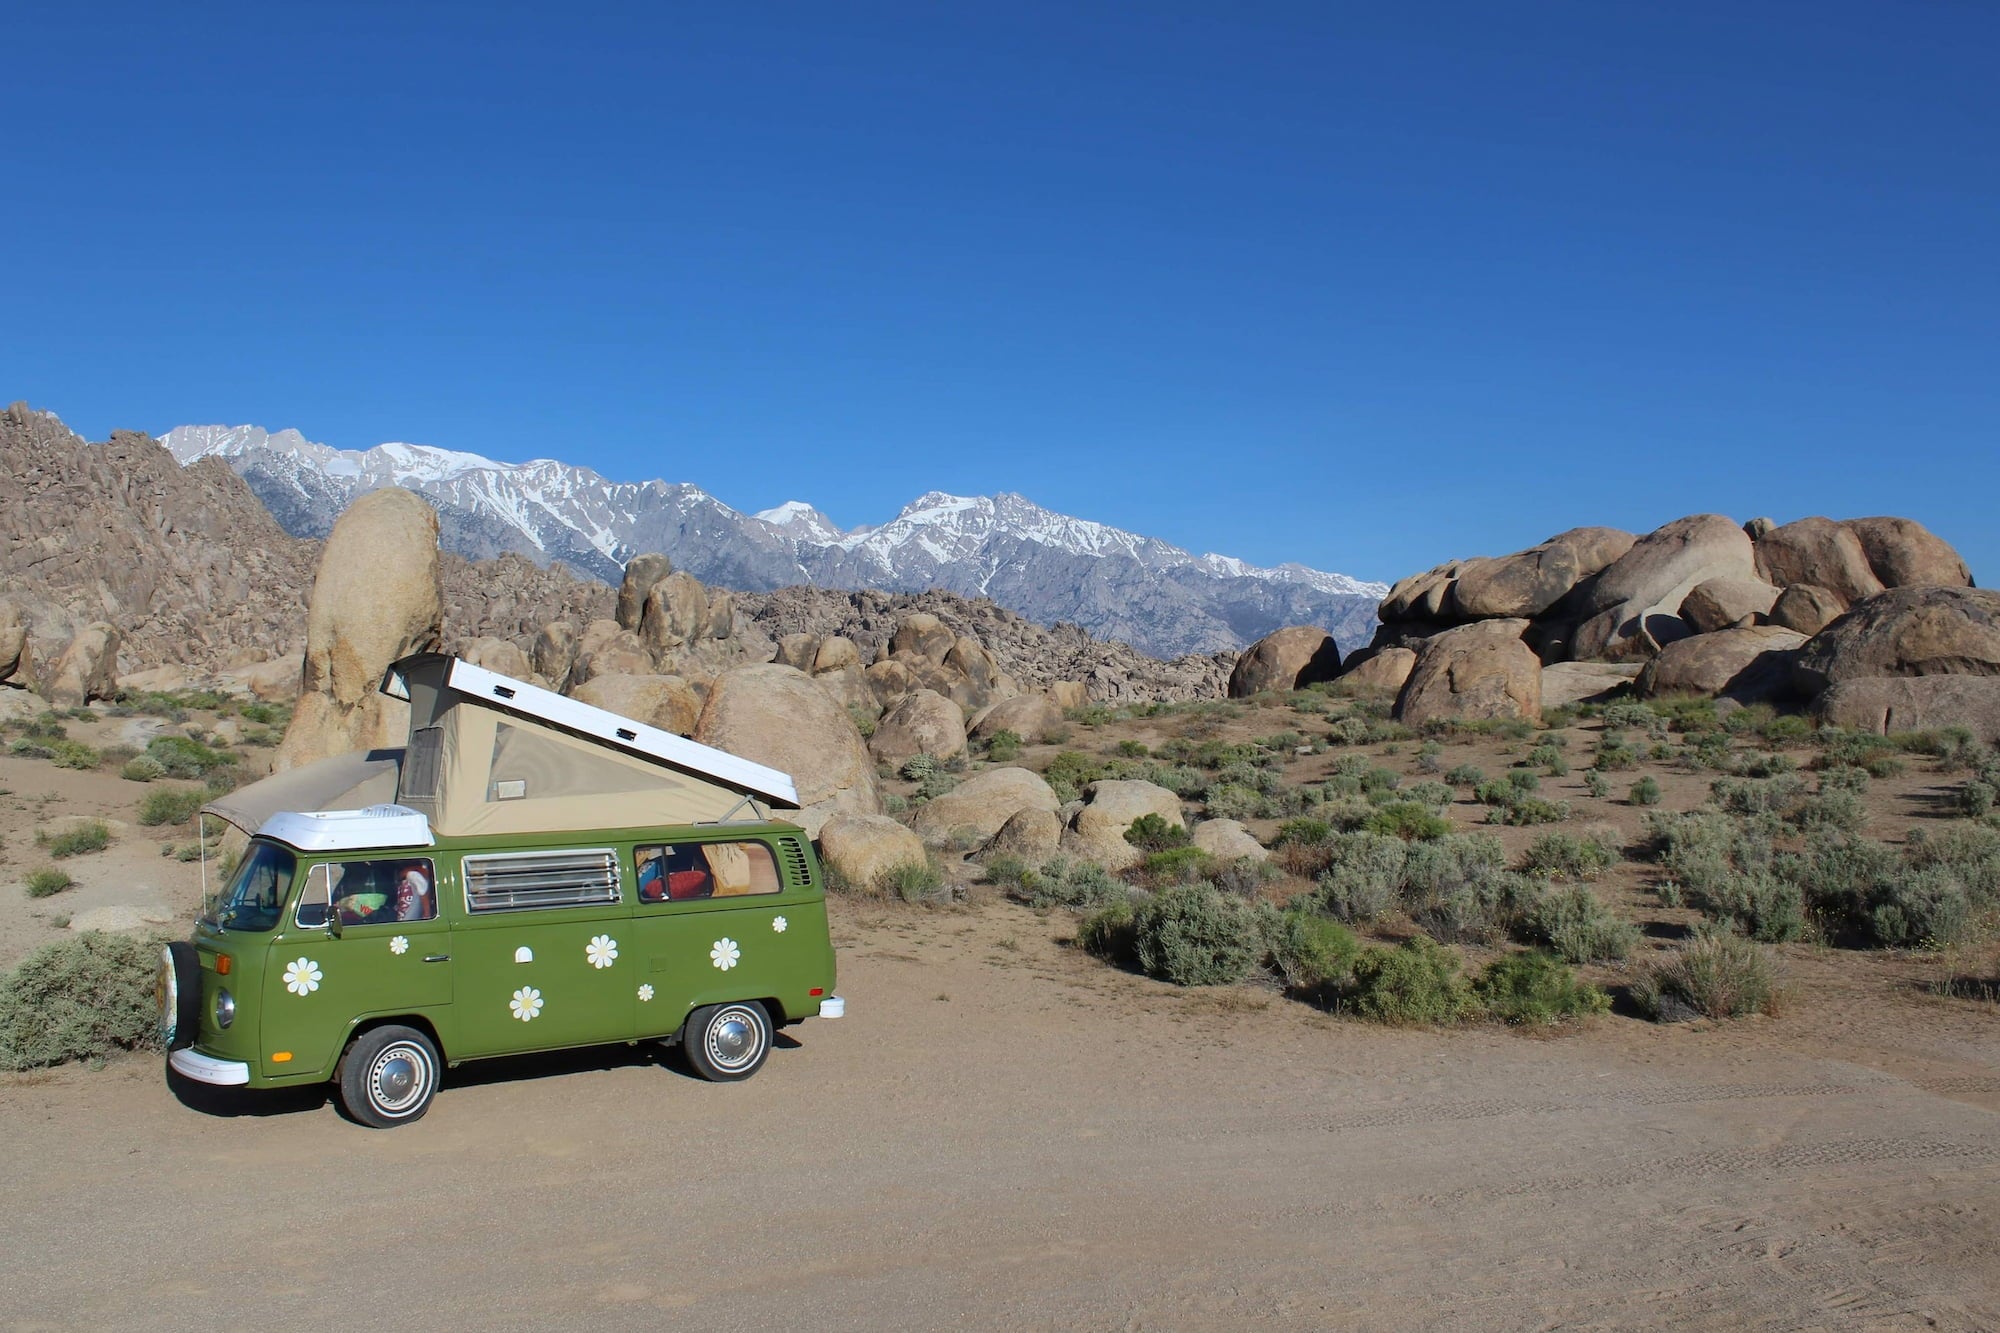 Green VW van with polka dots and pop up tent parked in the desert below Alabama hills.